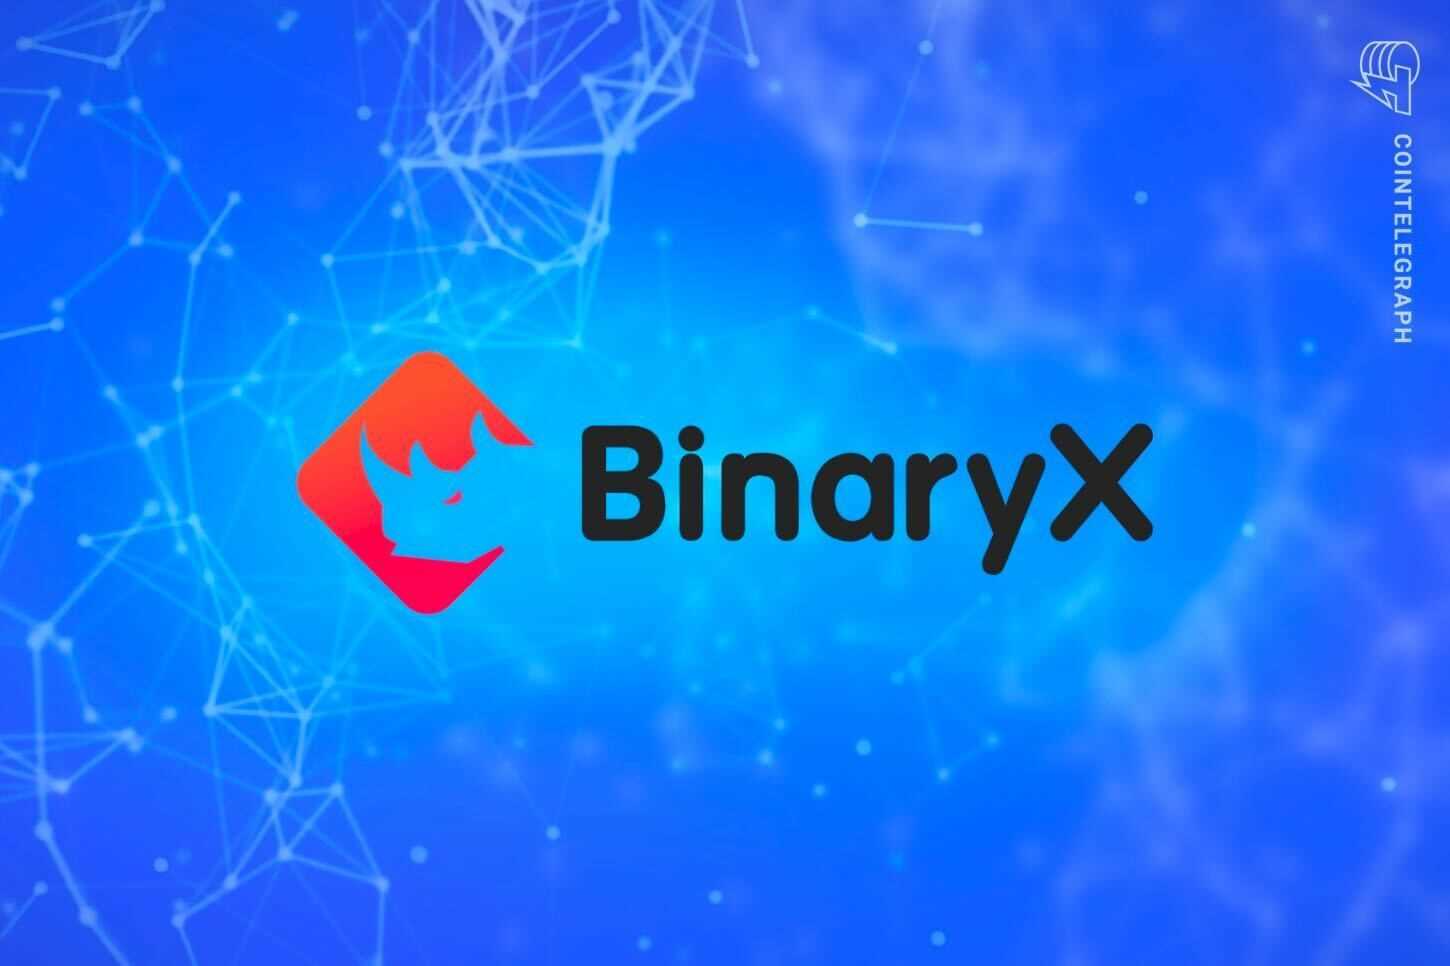 BNX to undergo 1:100 split to give major boost of investor confidence for BinaryX games and products